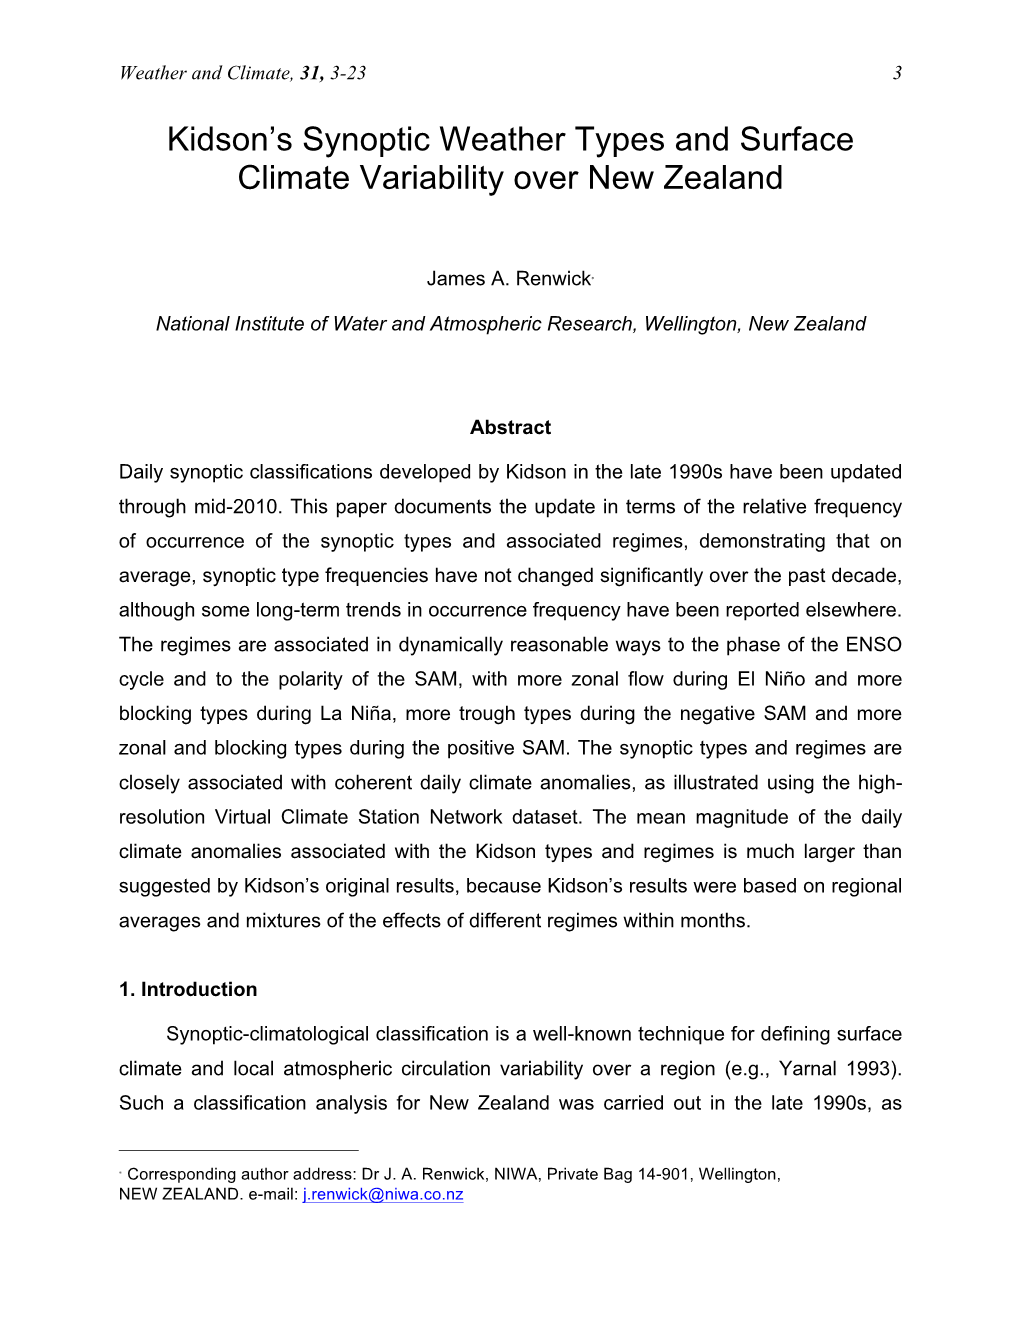 Kidson's Synoptic Weather Types and Surface Climate Variability Over